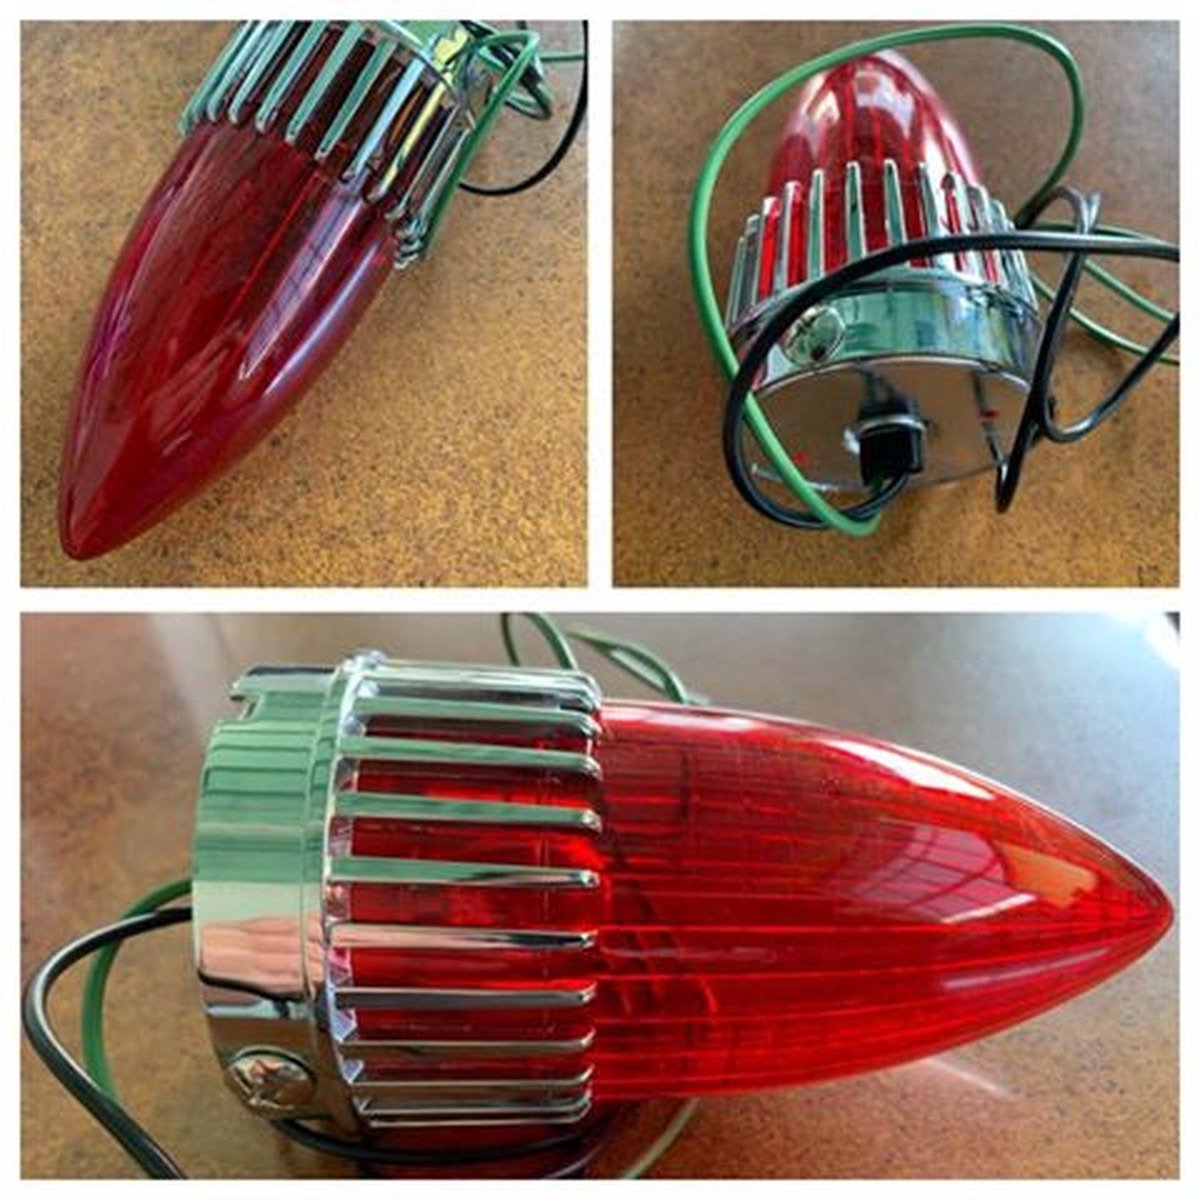 Cadillac Tail Light1959 Cadillac Style Tail Light, Polycarbonate Lens, Chrome Die Cast Bezel - Red Lens